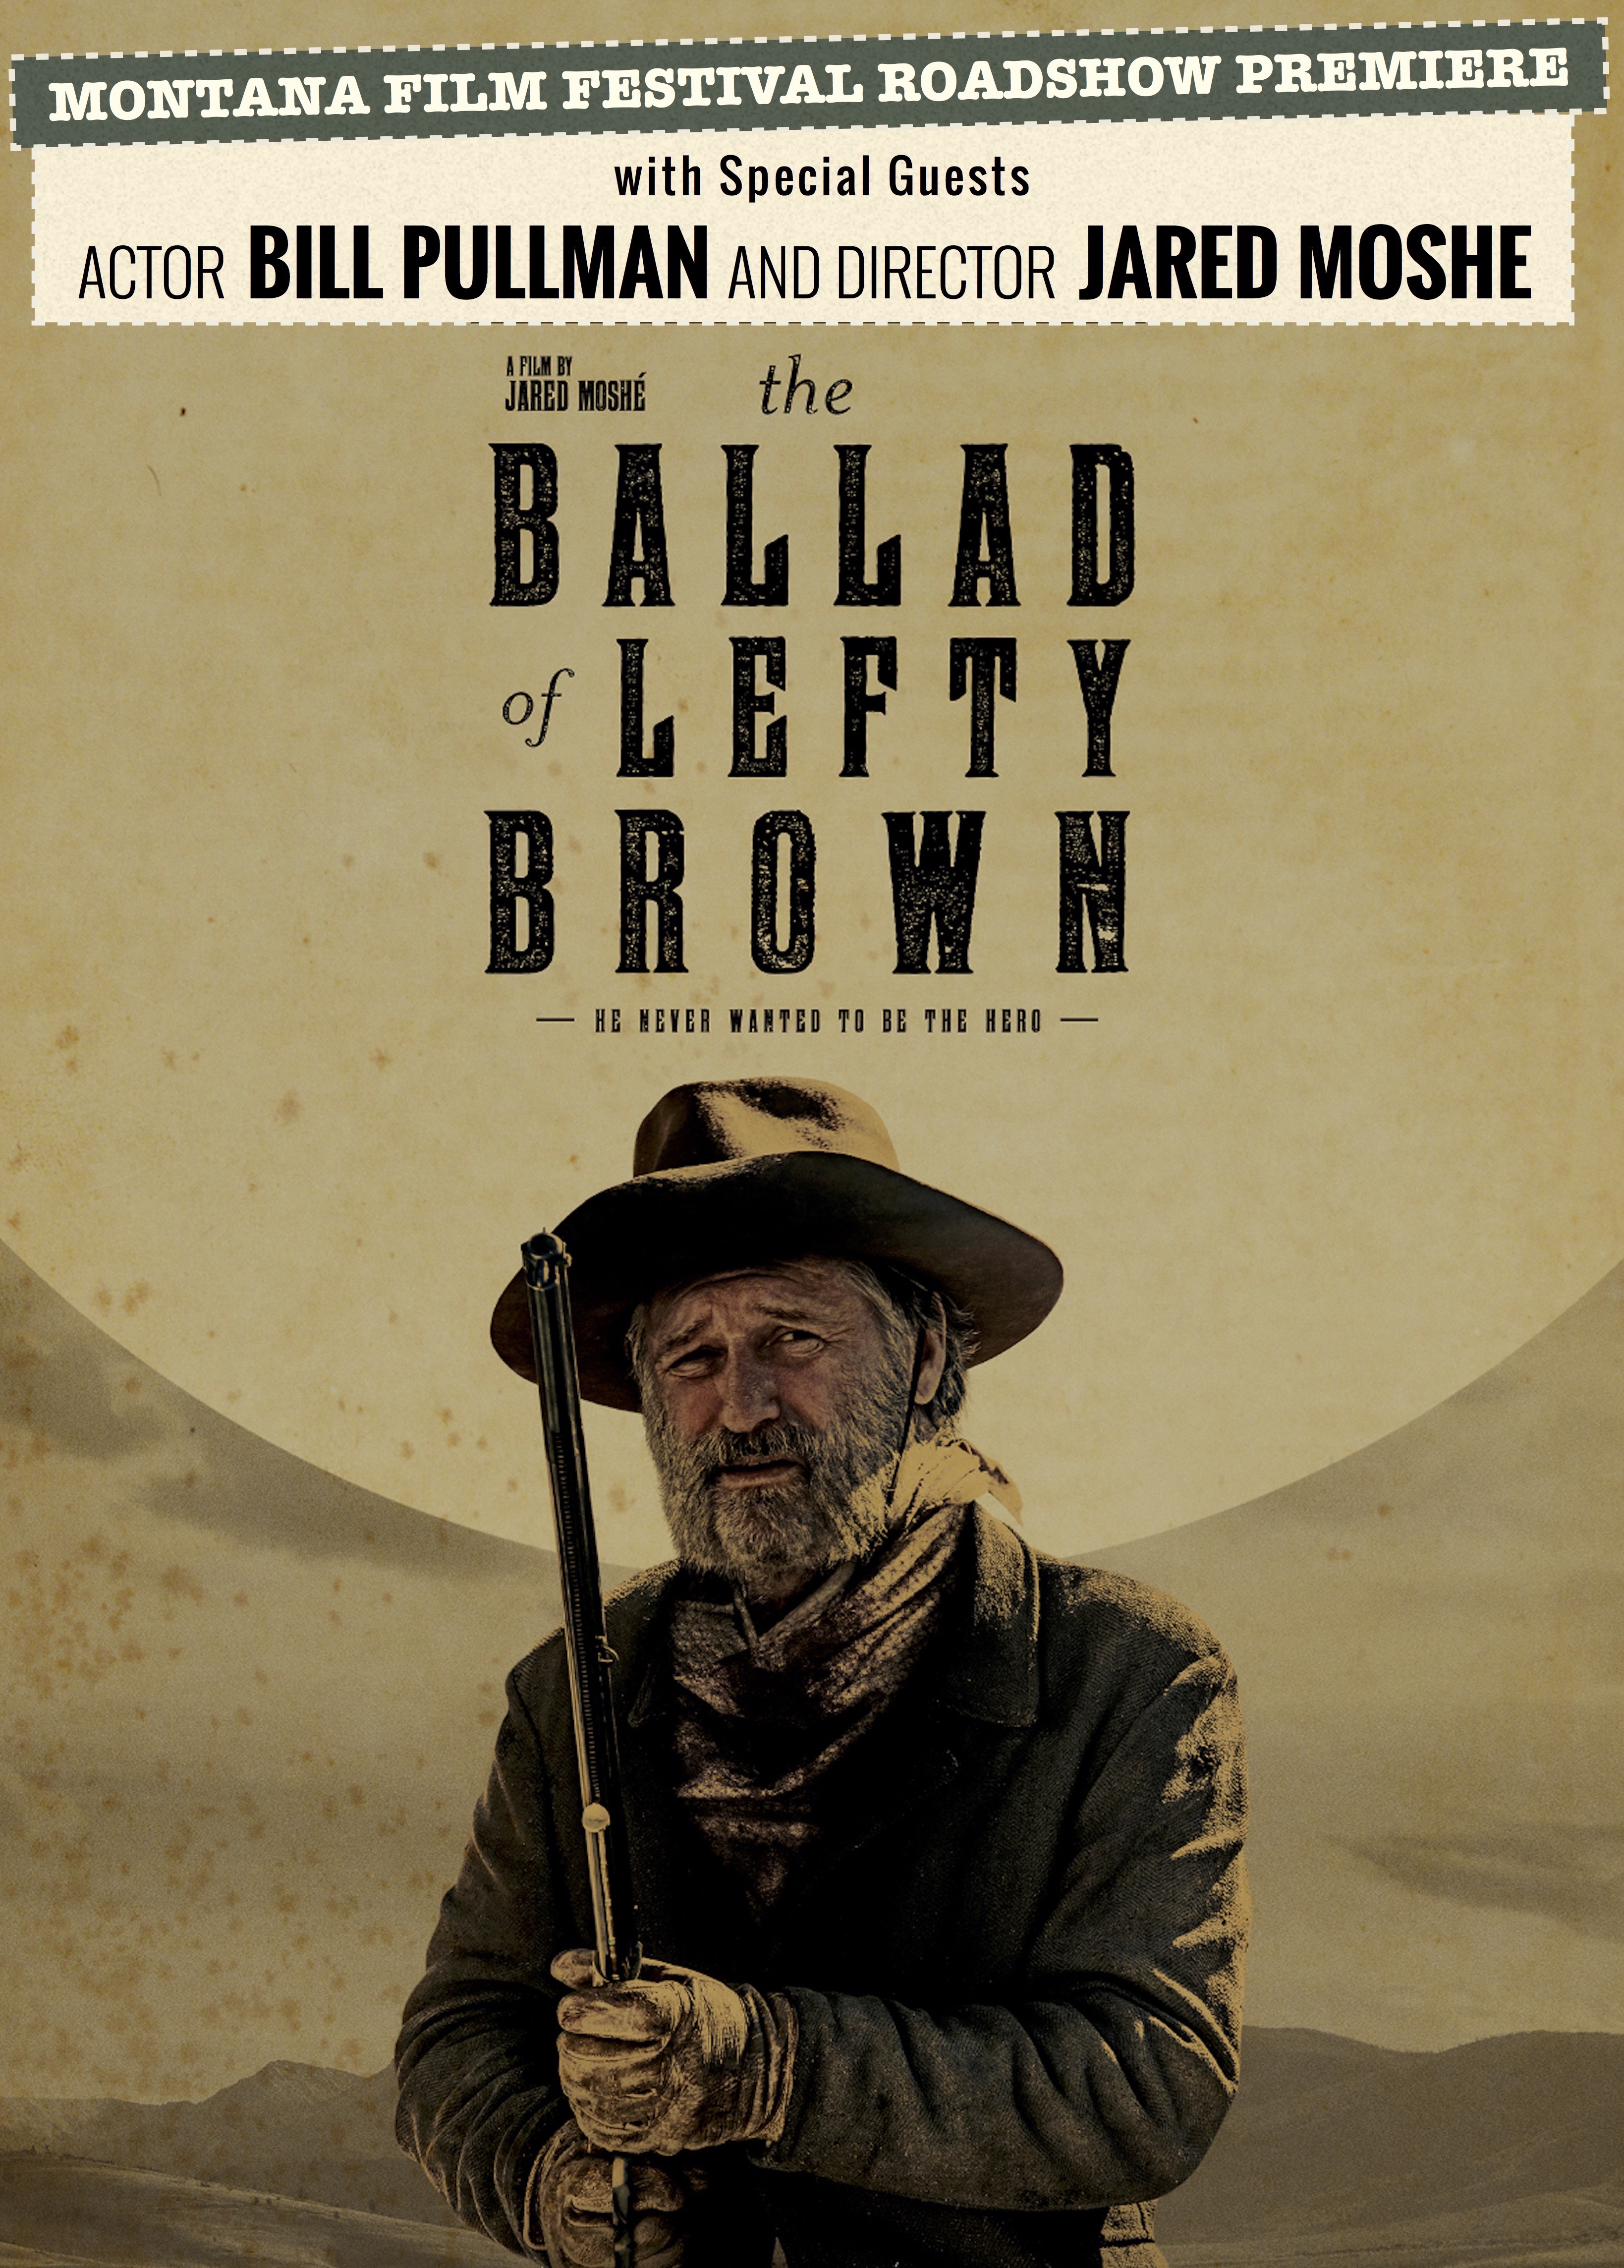 The Ballad of Lefty Brown ***SOLD OUT*** - Cactus Records